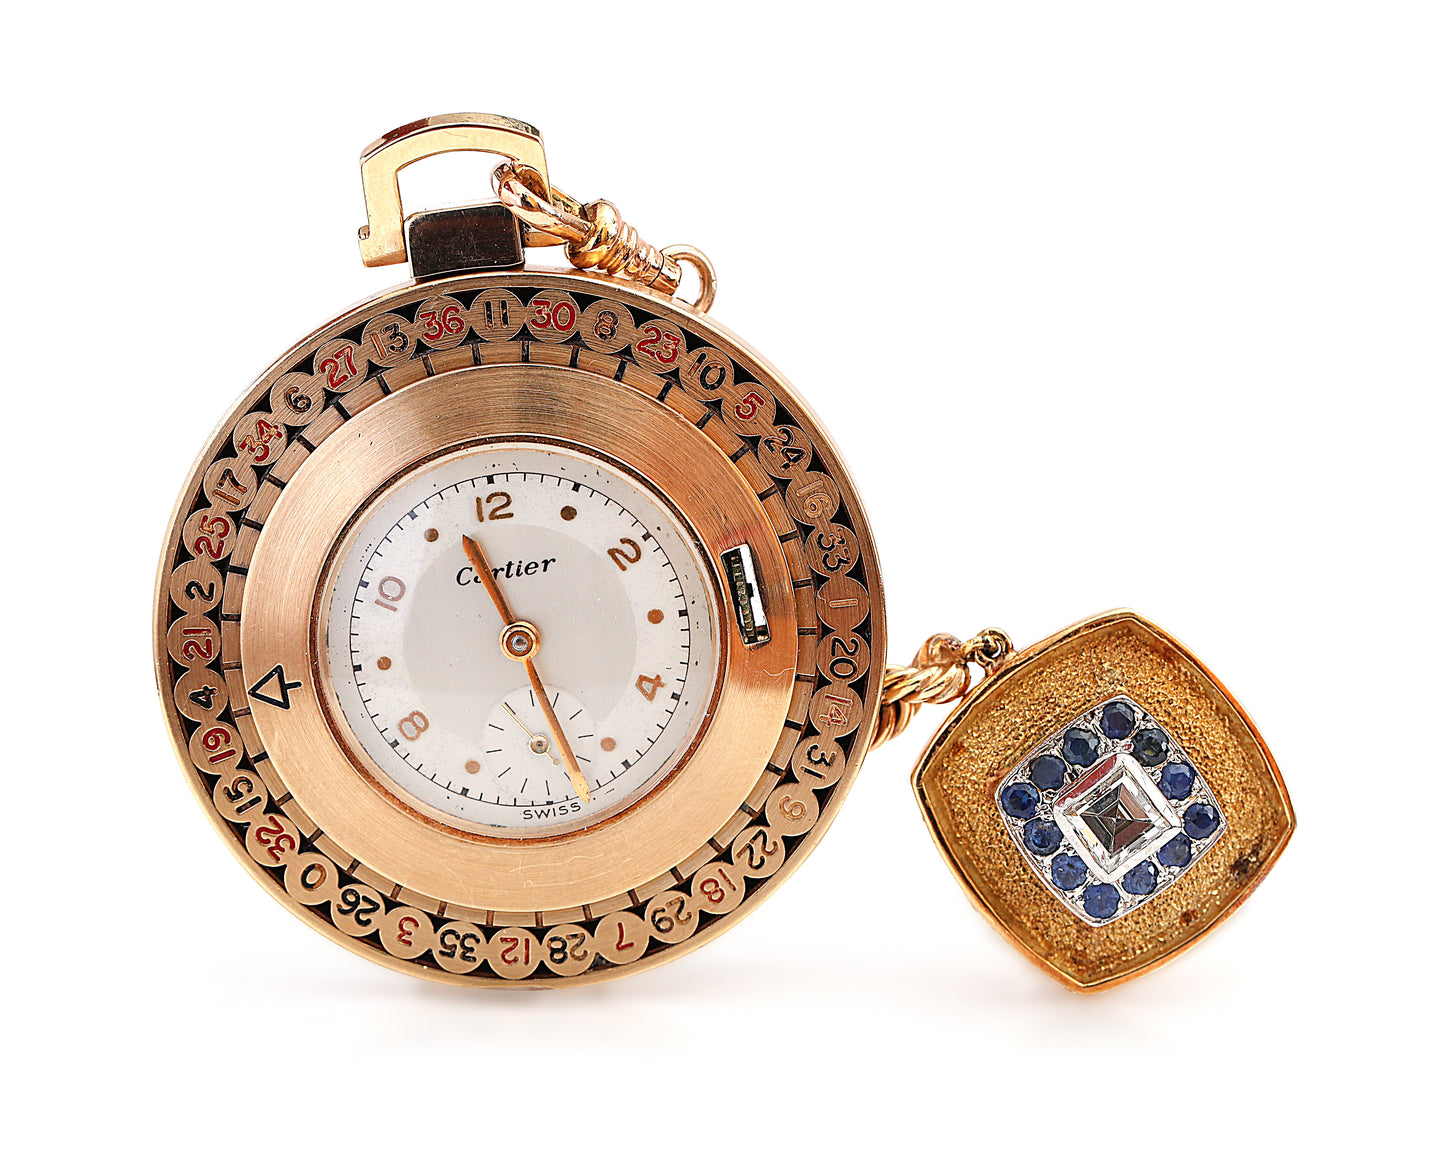 1950s Cartier Roulette pocket watch with diamond fob